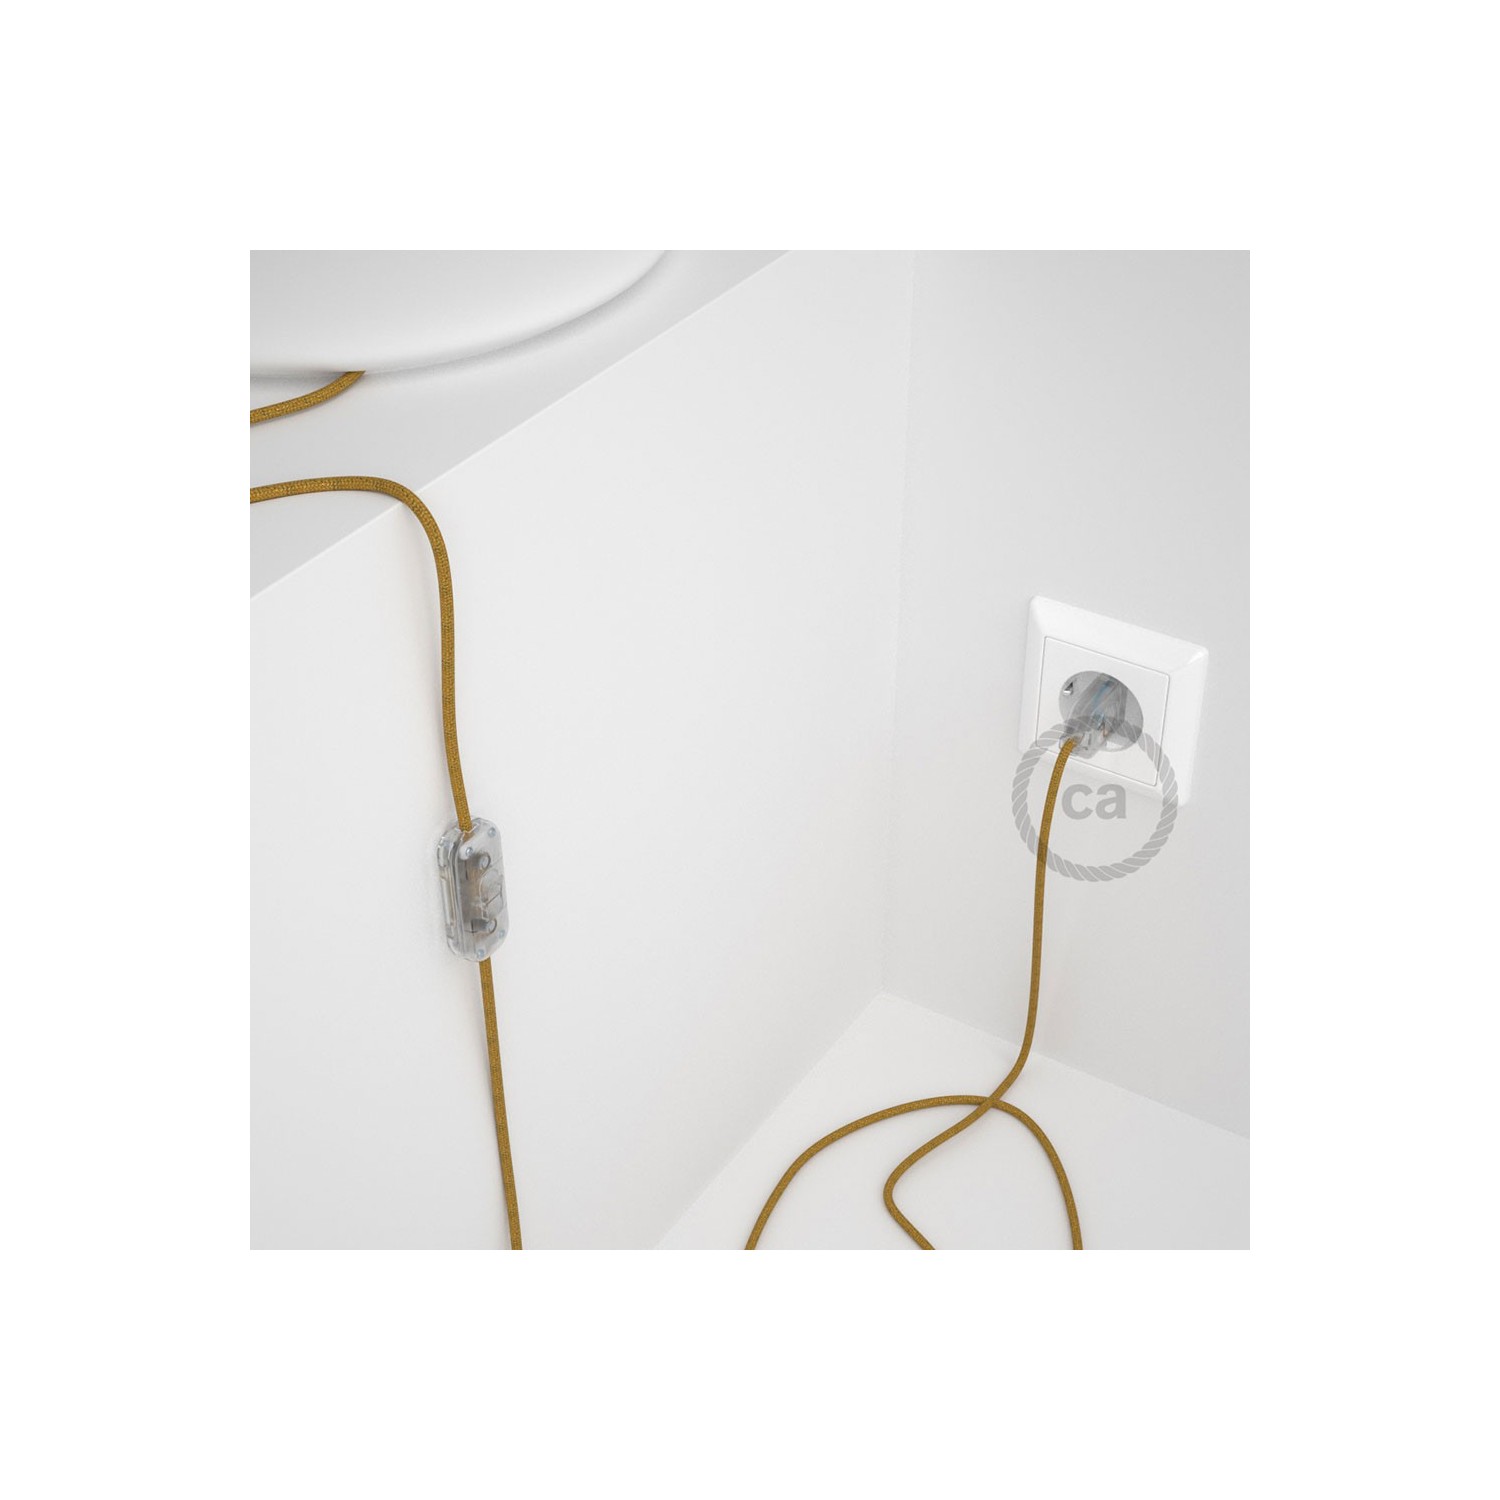 Lamp wiring, RL05 Sparkly Gold Rayon 1,80 m. Choose the colour of the switch and plug.